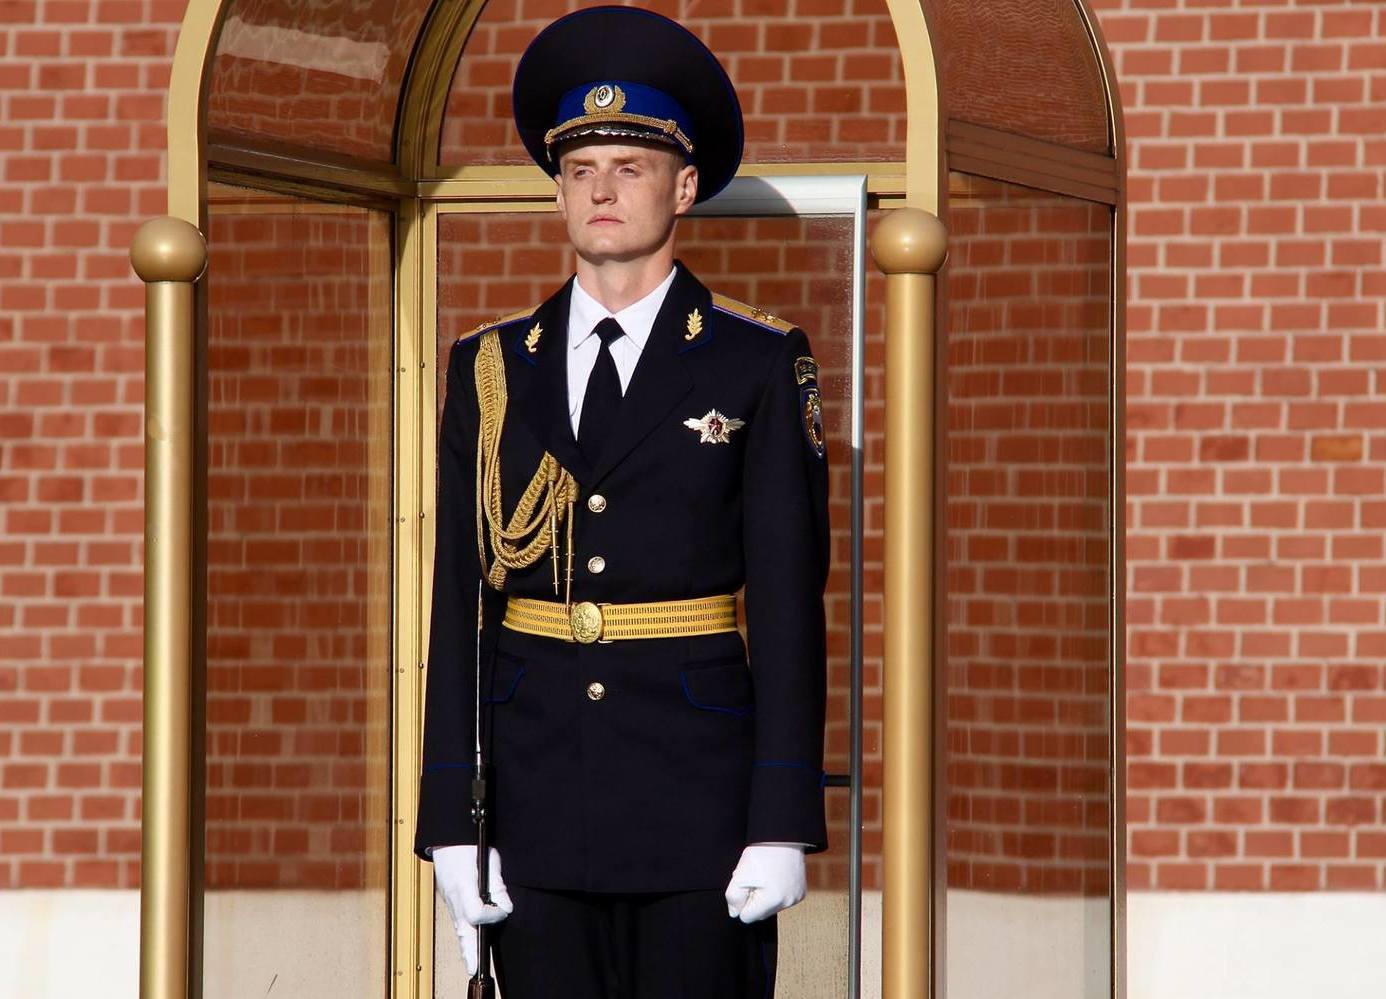 Guard of the Tomb of the Unknown Soldiers